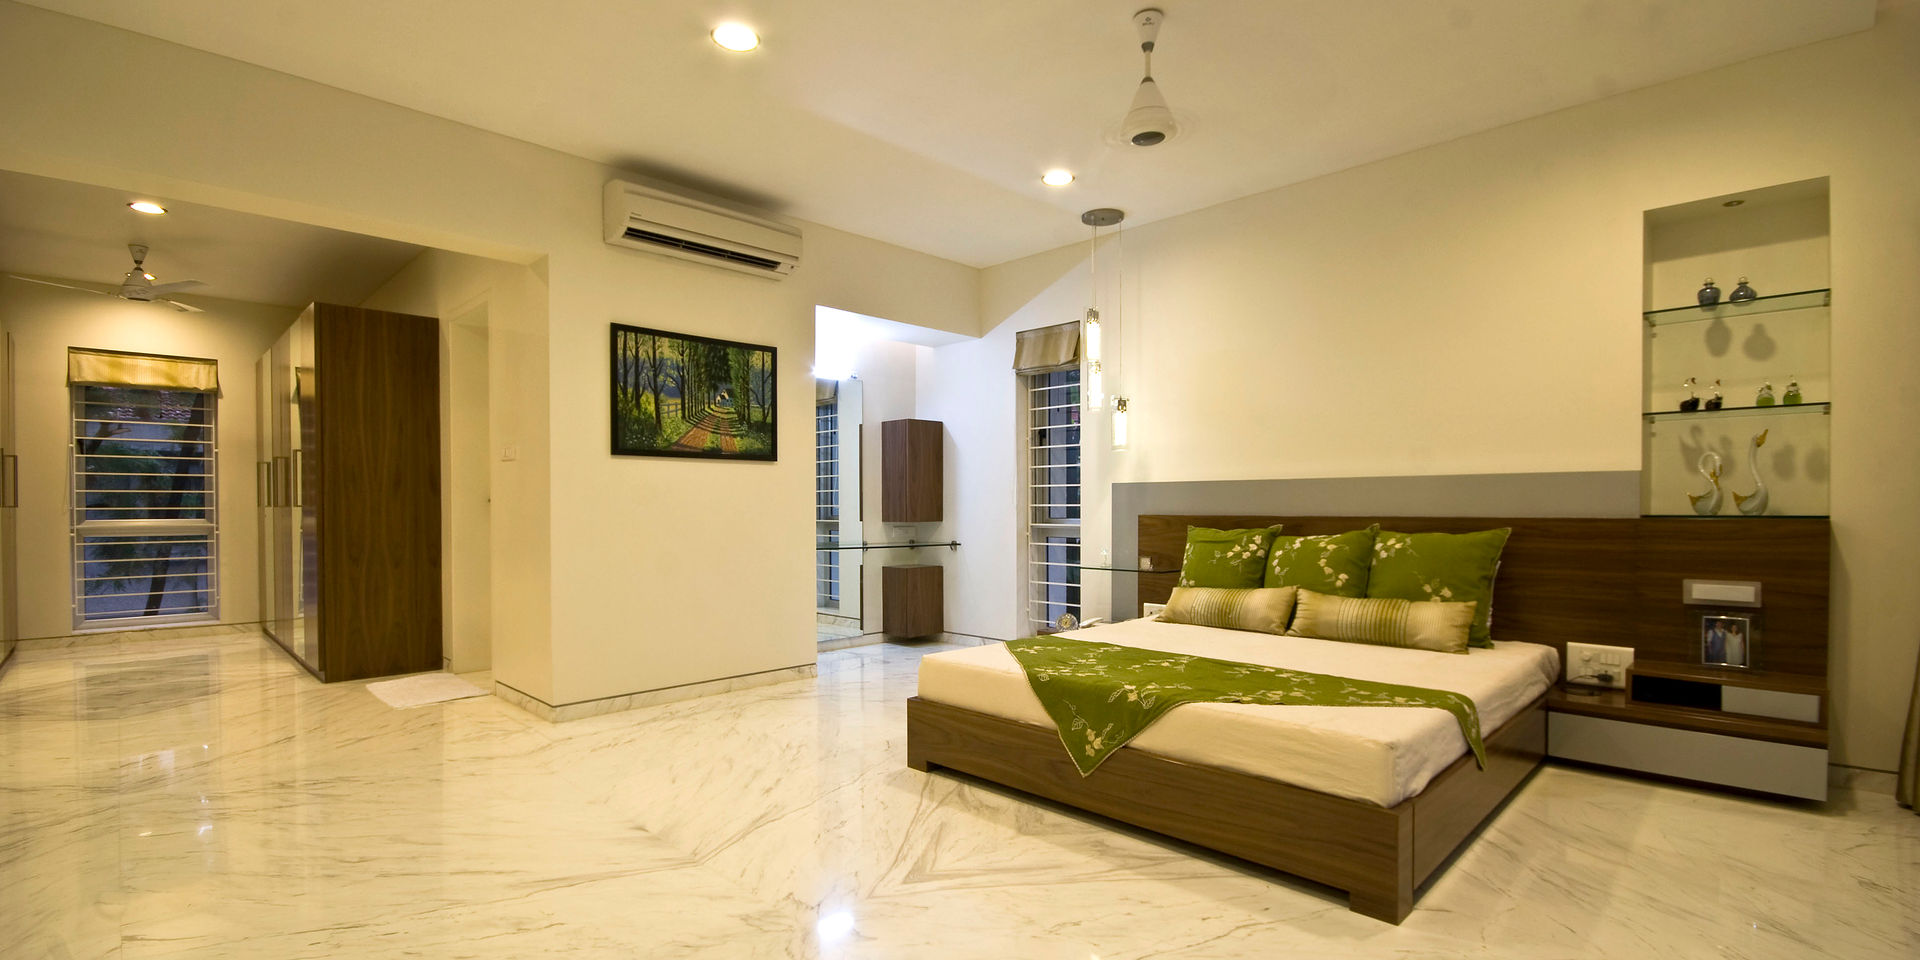 Private Residence at Sopan Baug, Pune Chaney Architects Minimalist bedroom